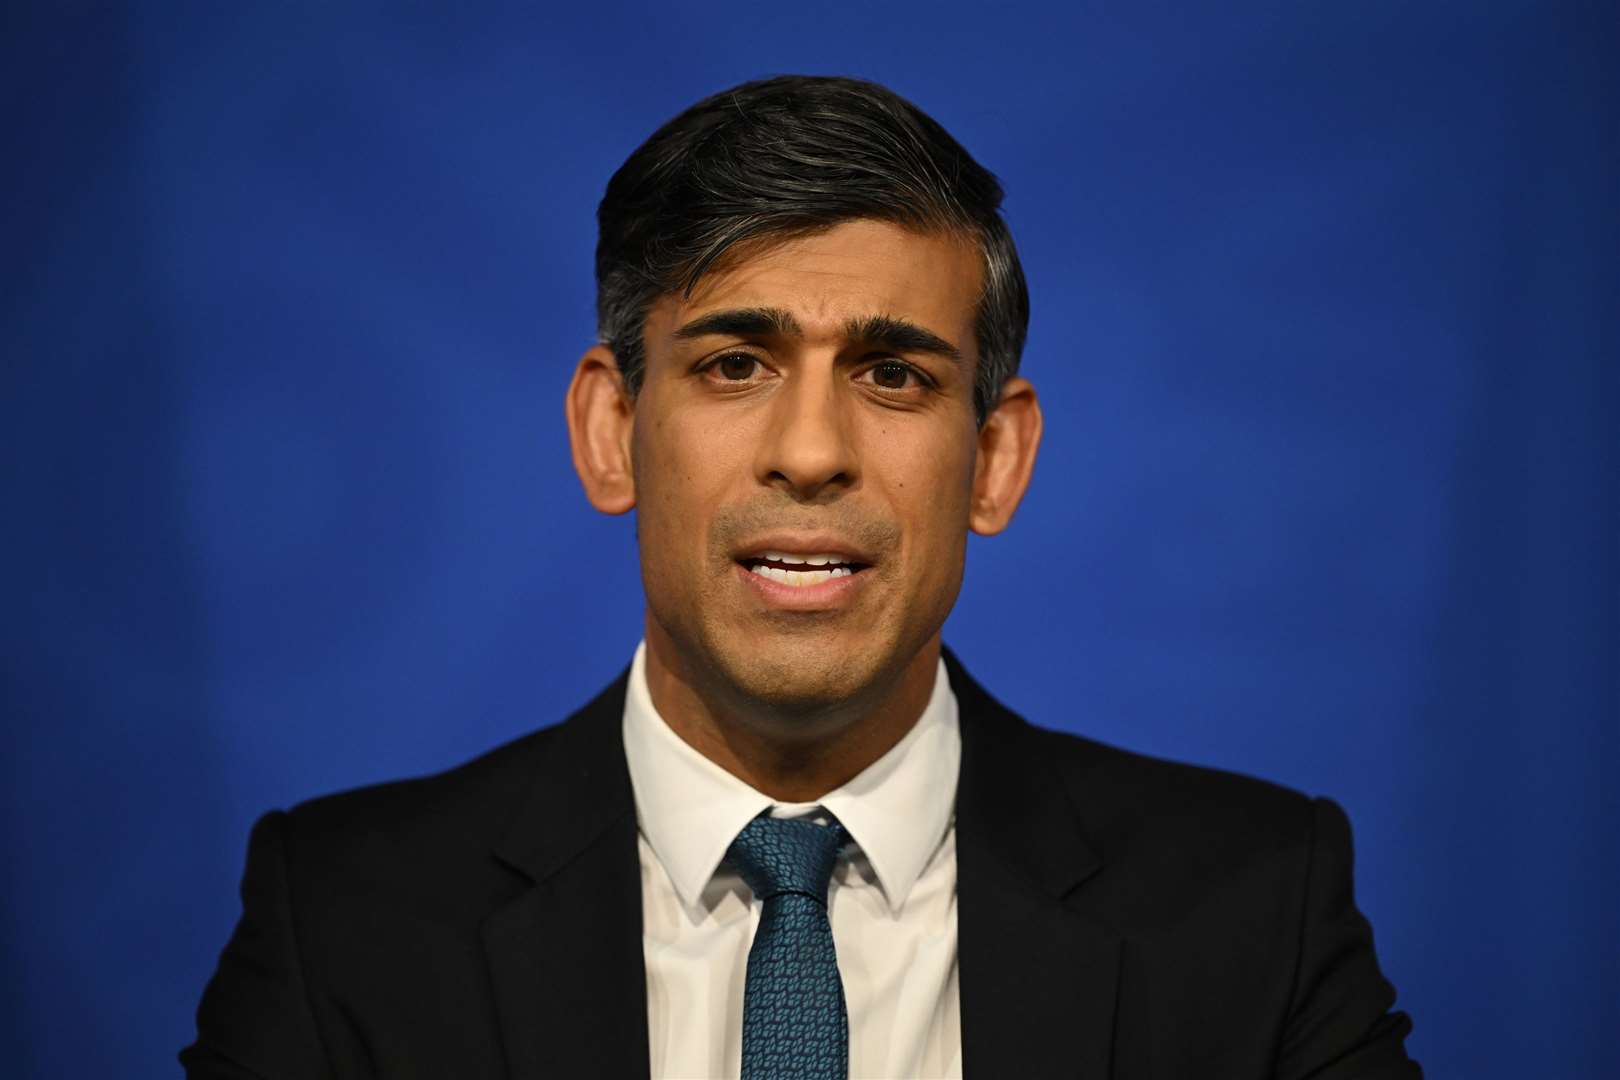 Rishi Sunak wanted advice on how to stay in power, according to Dominic Cummings (Leon Neal/PA)